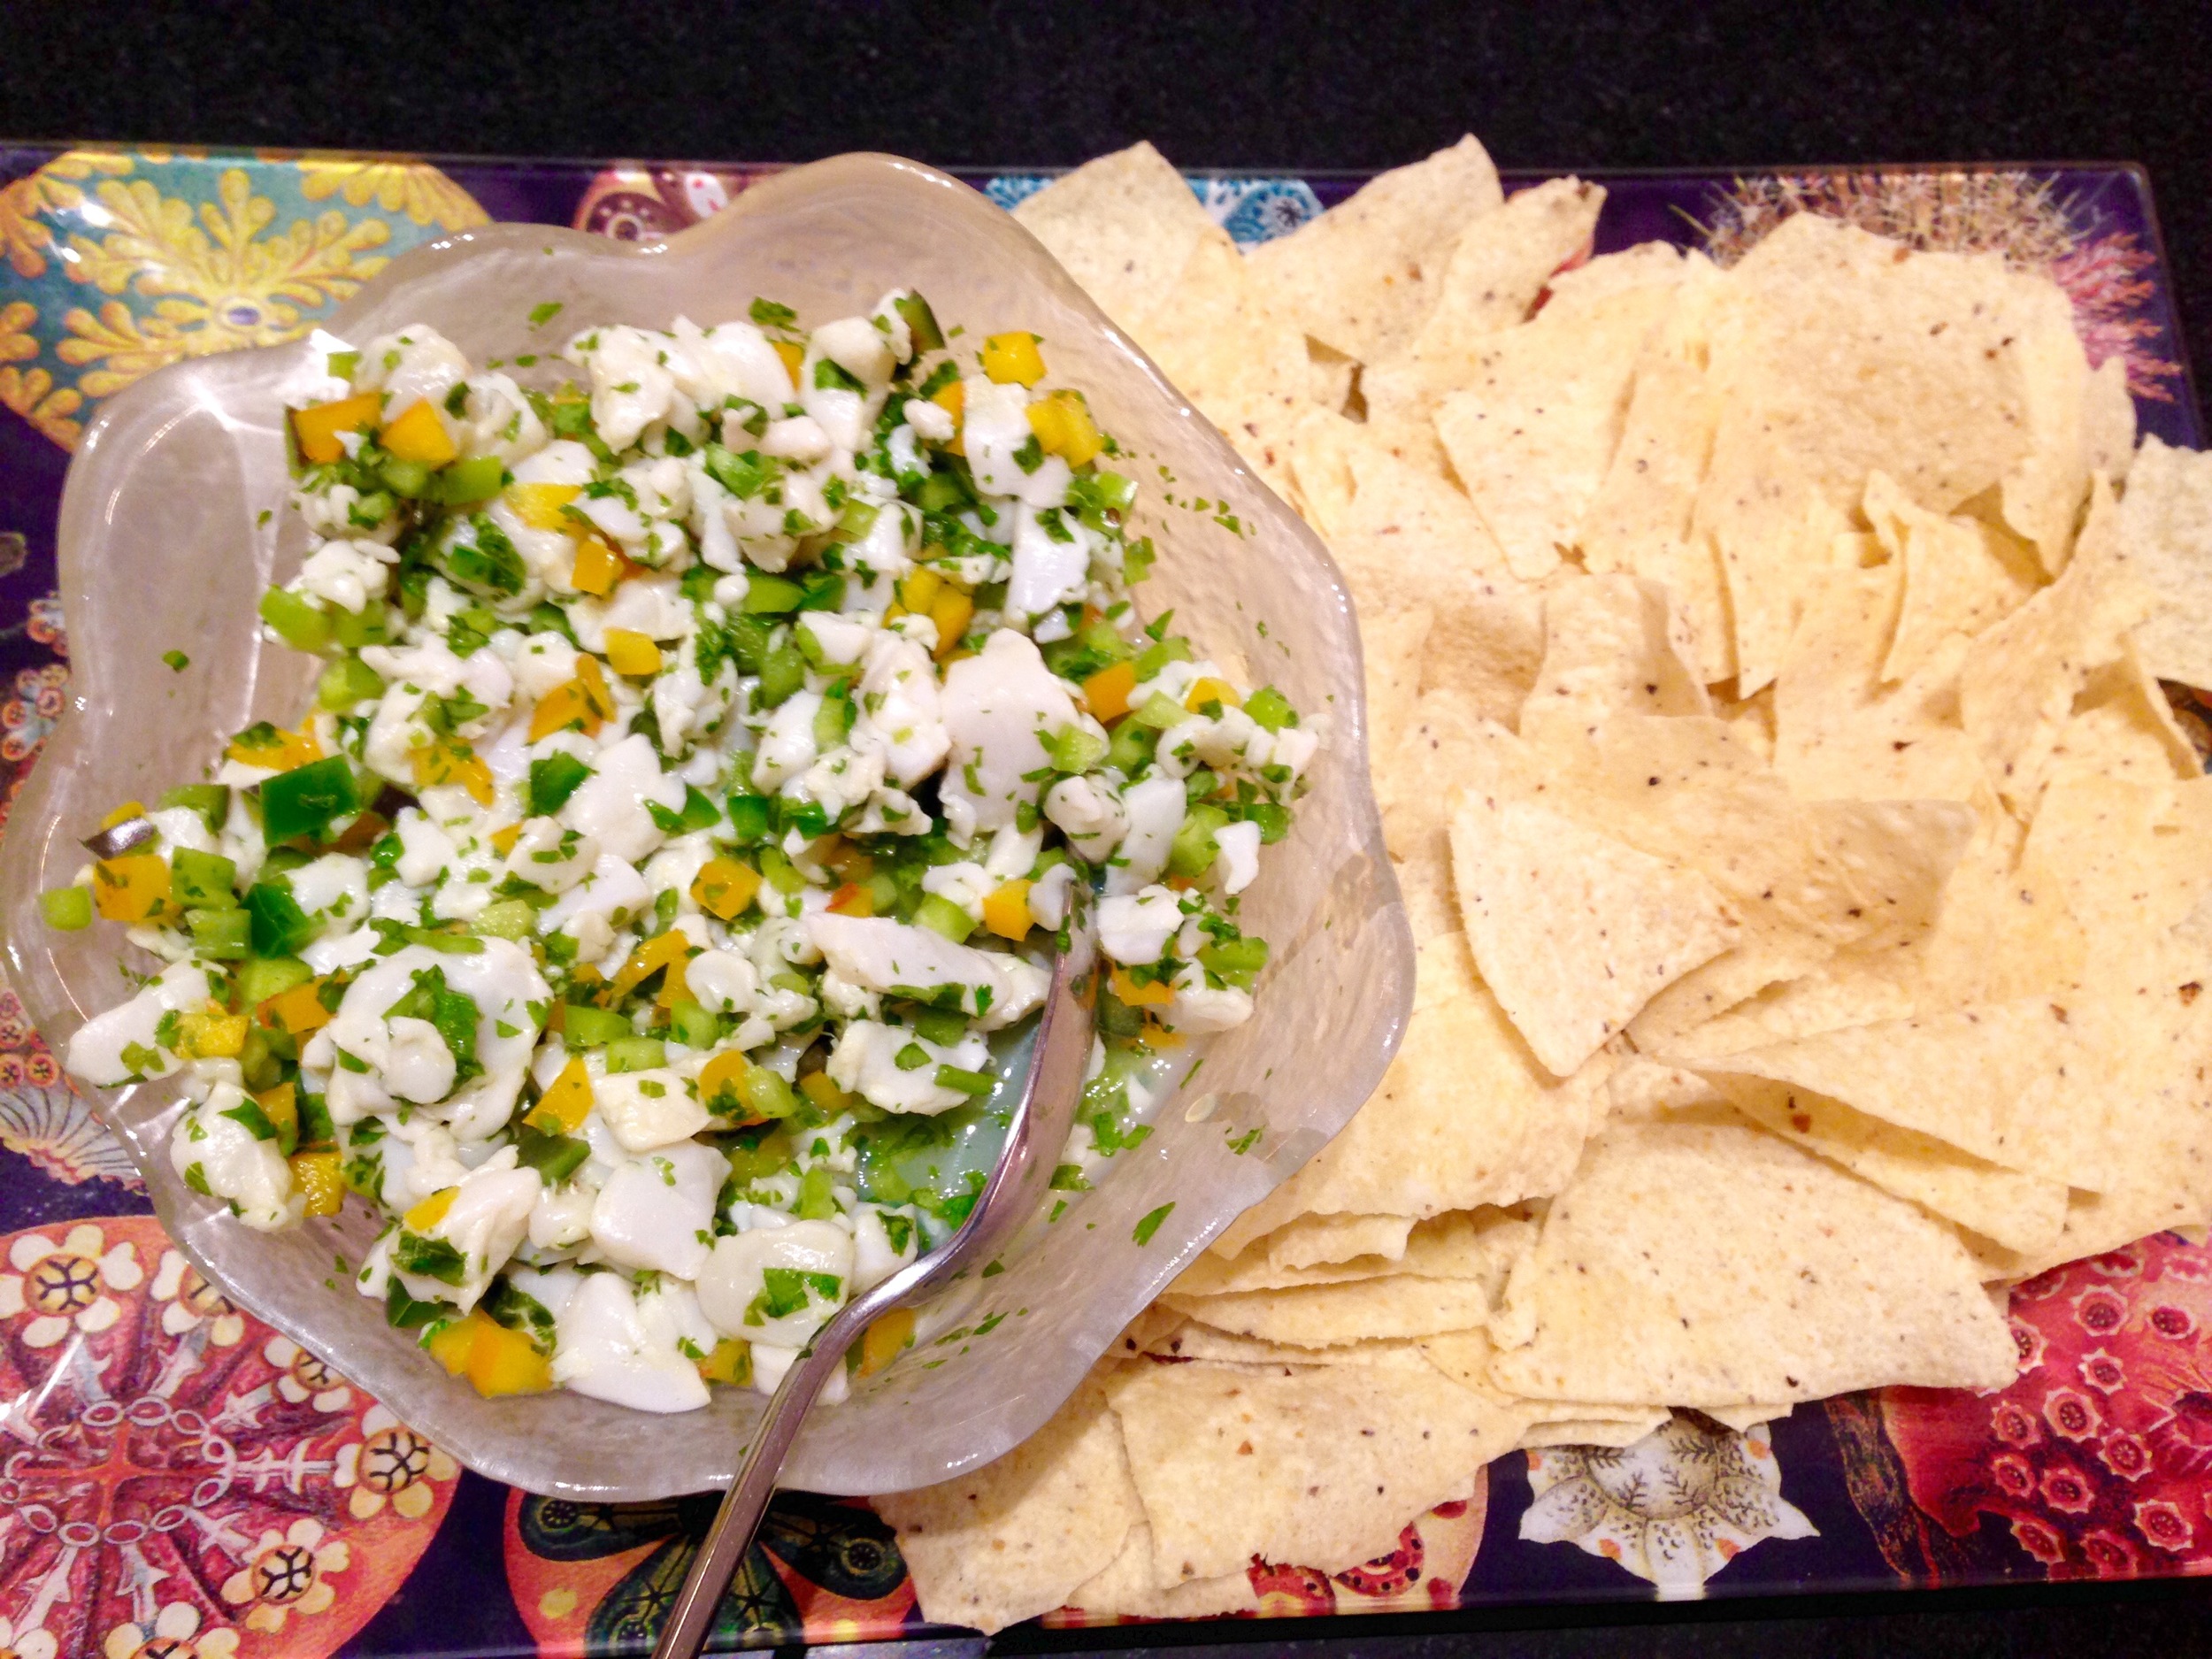 Spicy scallop ceviche with tortilla chips